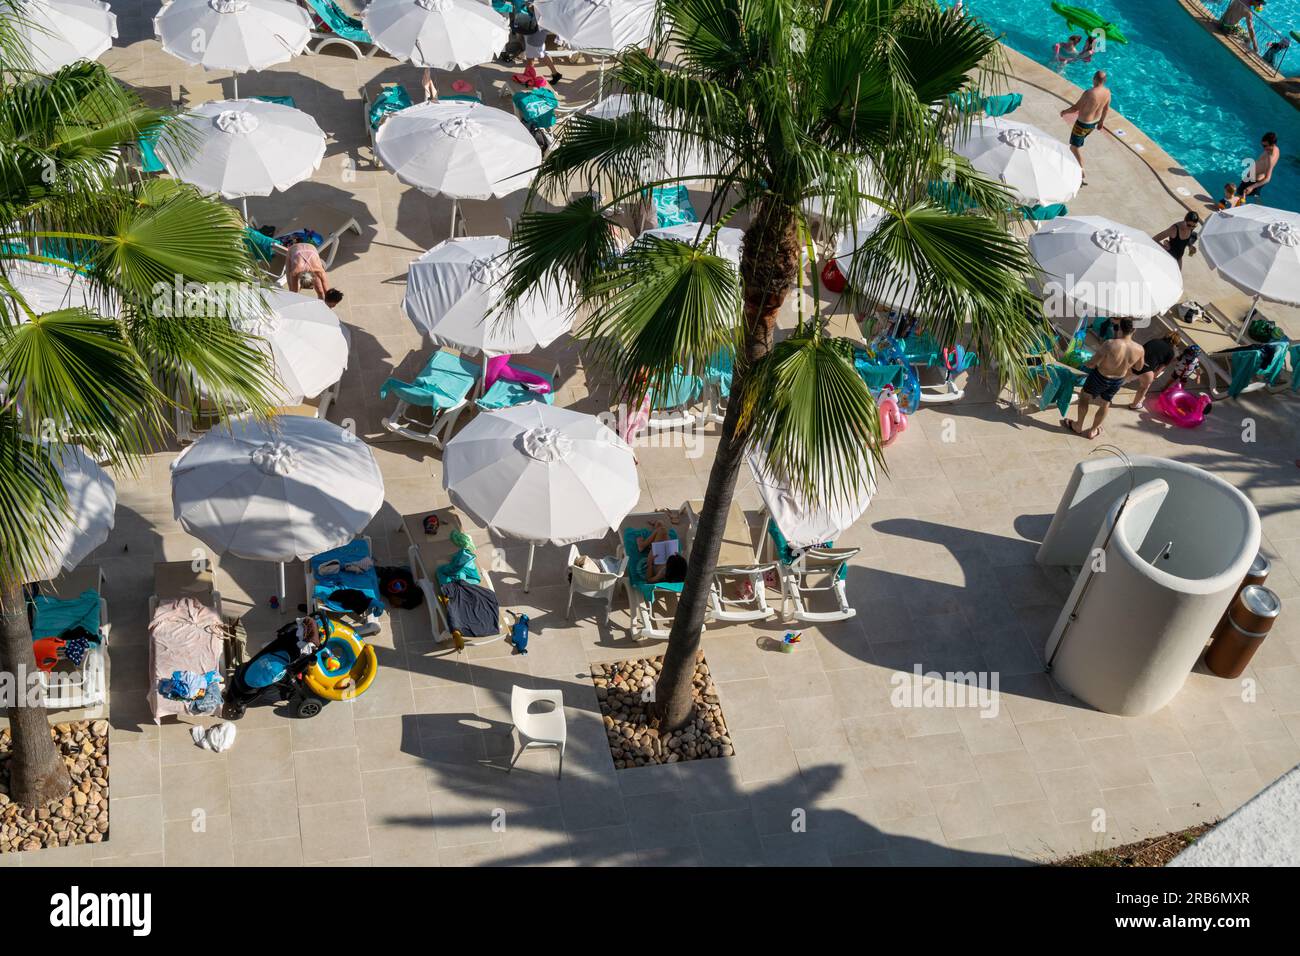 Hotels and pools at Palma de majorca, Mallorca hotels. Picture taken of people under sun umbrellas at summer time on resort or hotel. Resting and relaxing Stock Photo